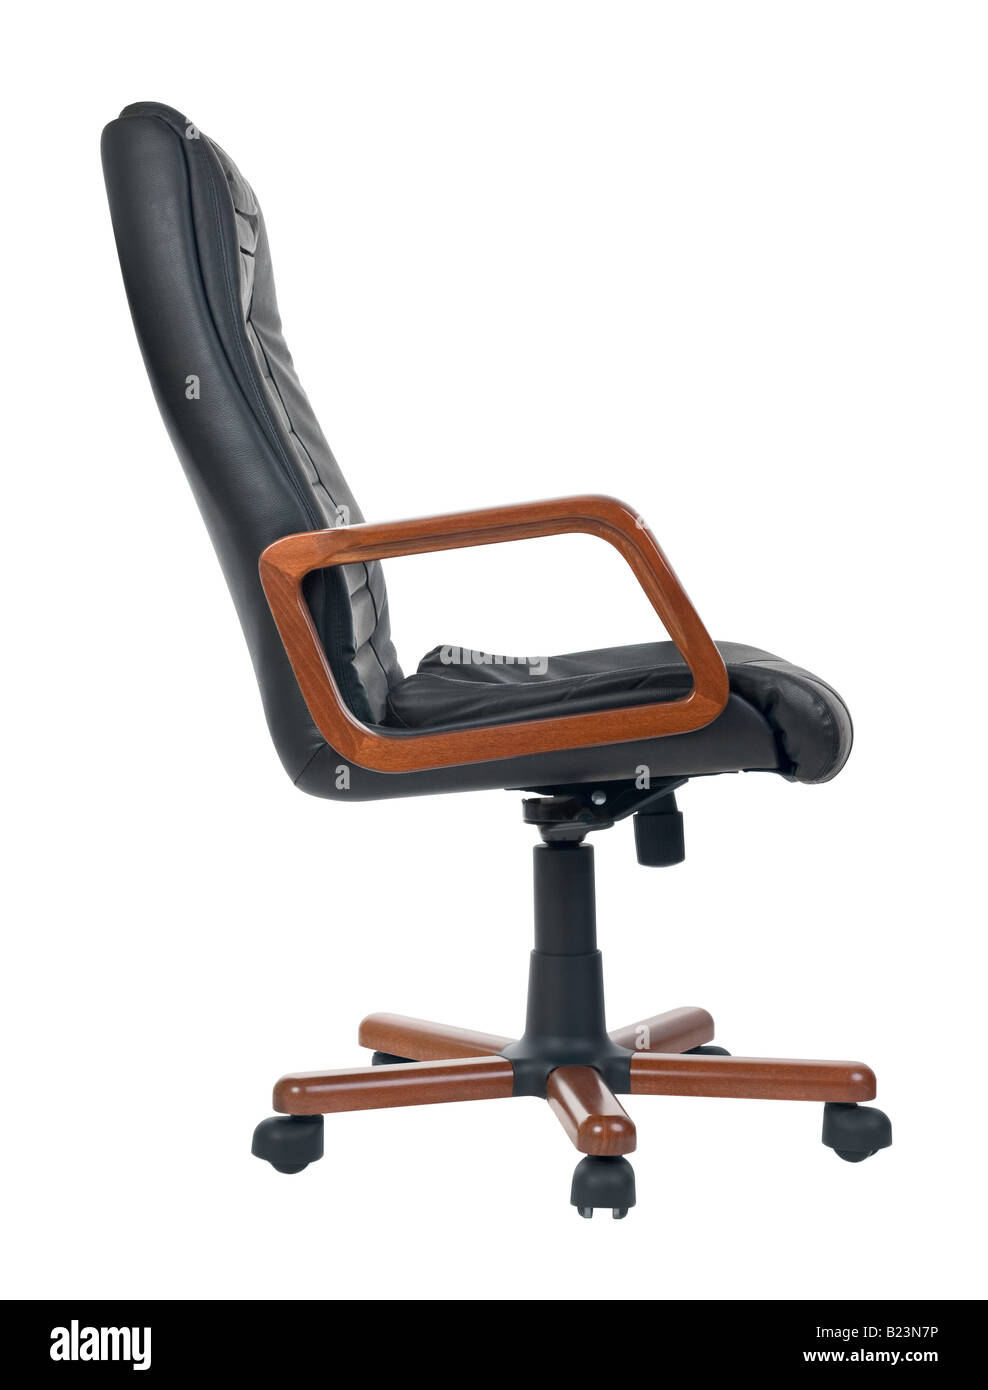 Expensive Office Armchair Of Leather And Wood For Executive Or